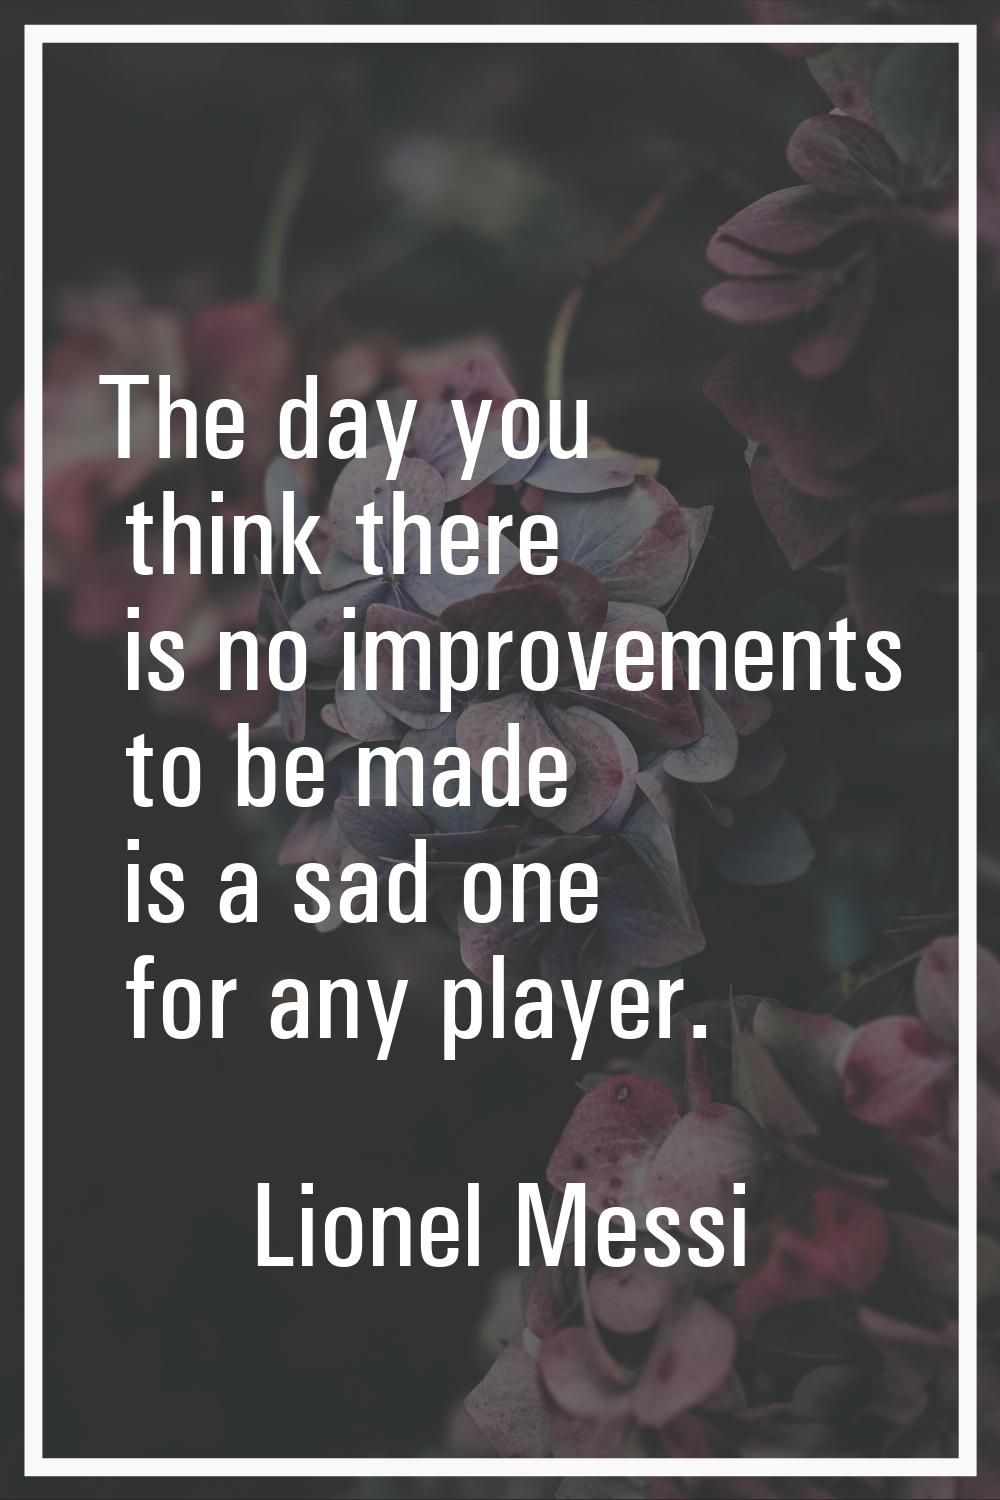 The day you think there is no improvements to be made is a sad one for any player.